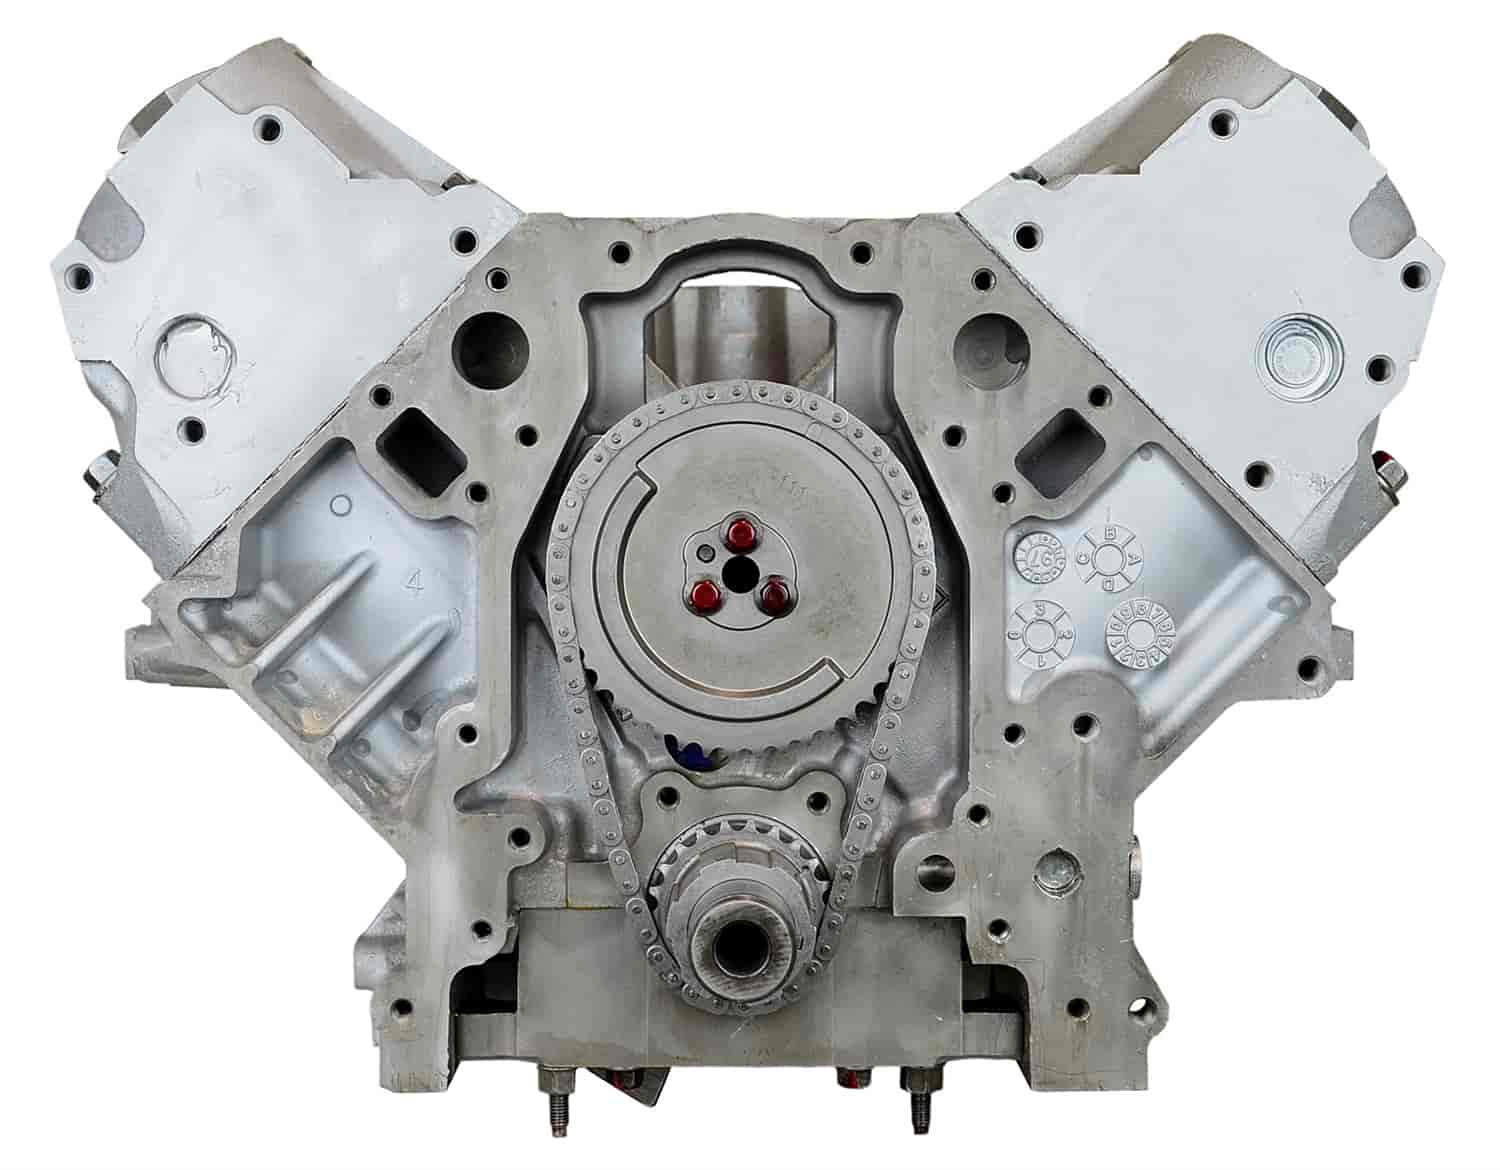 Remanufactured Crate Engine for 1998 Camaro & Firebird with 5.7L LS1 V8